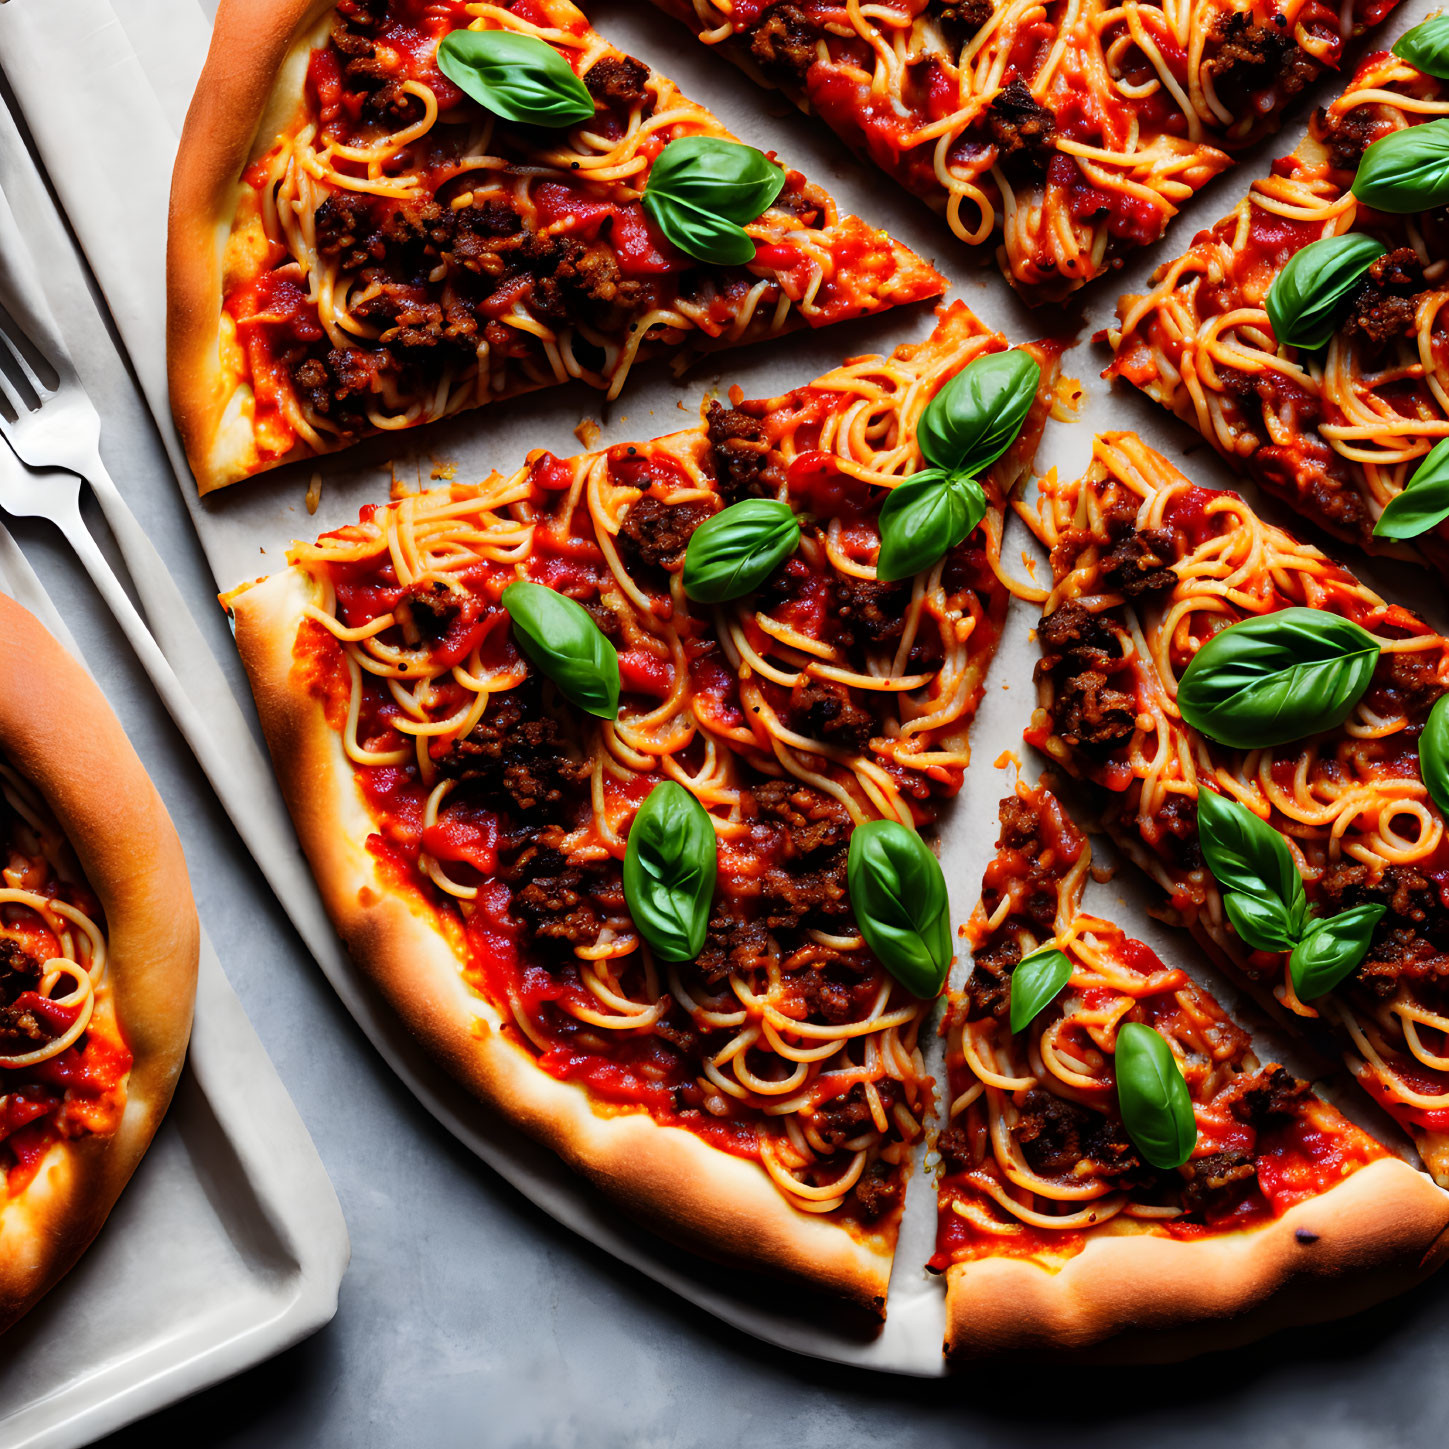 Pizza with spaghetti, meat sauce, and basil slices on light background